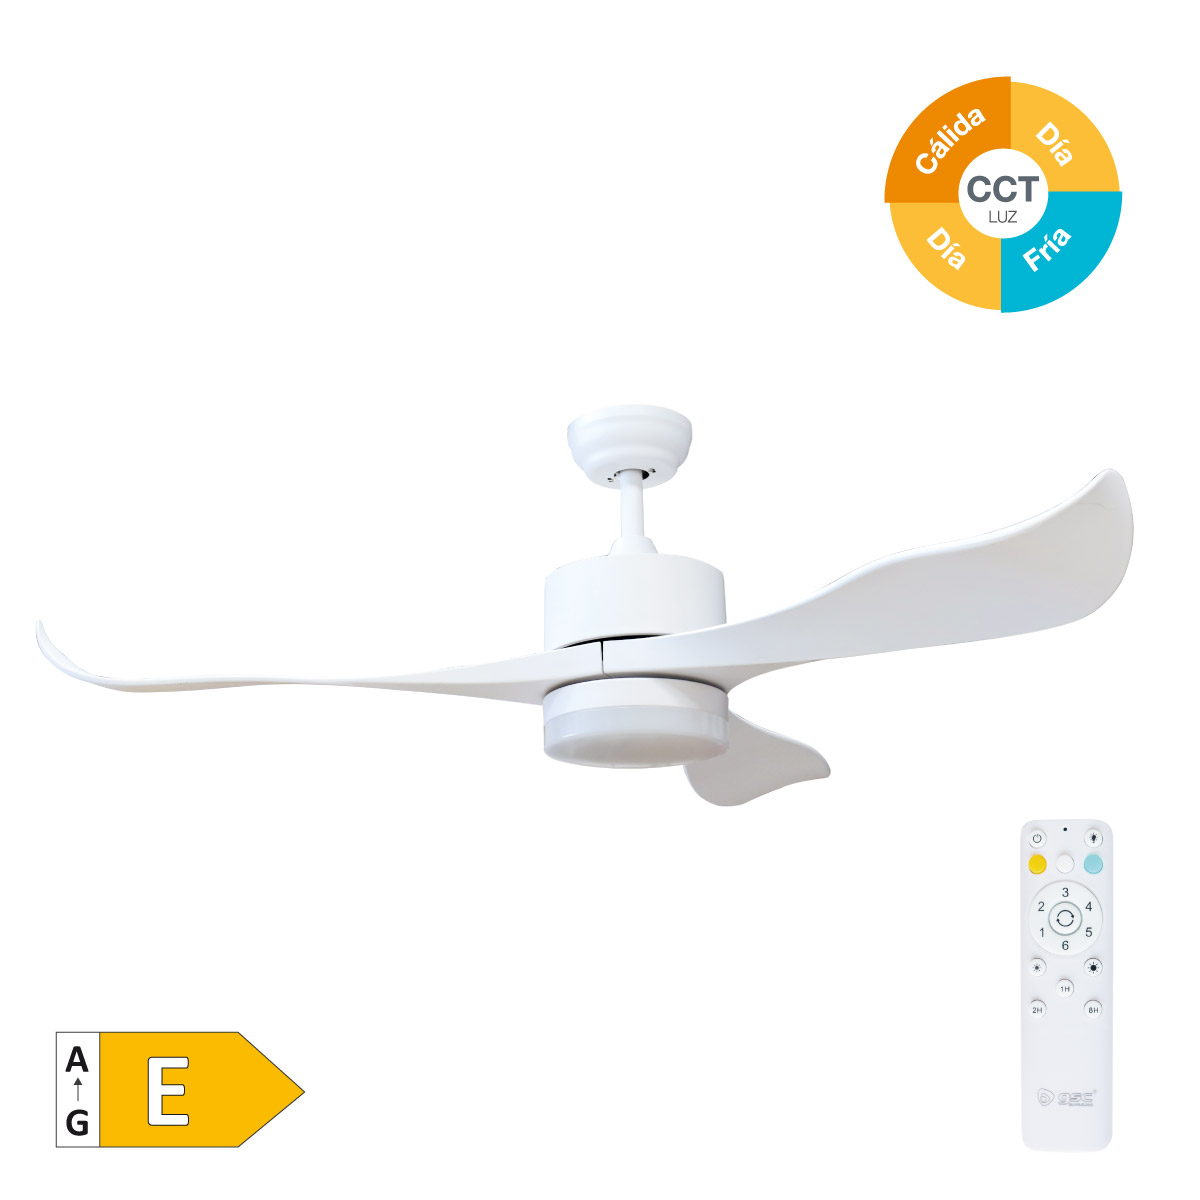 52' DC ceiling fan with remote control CCT 3 blades Wood effect White